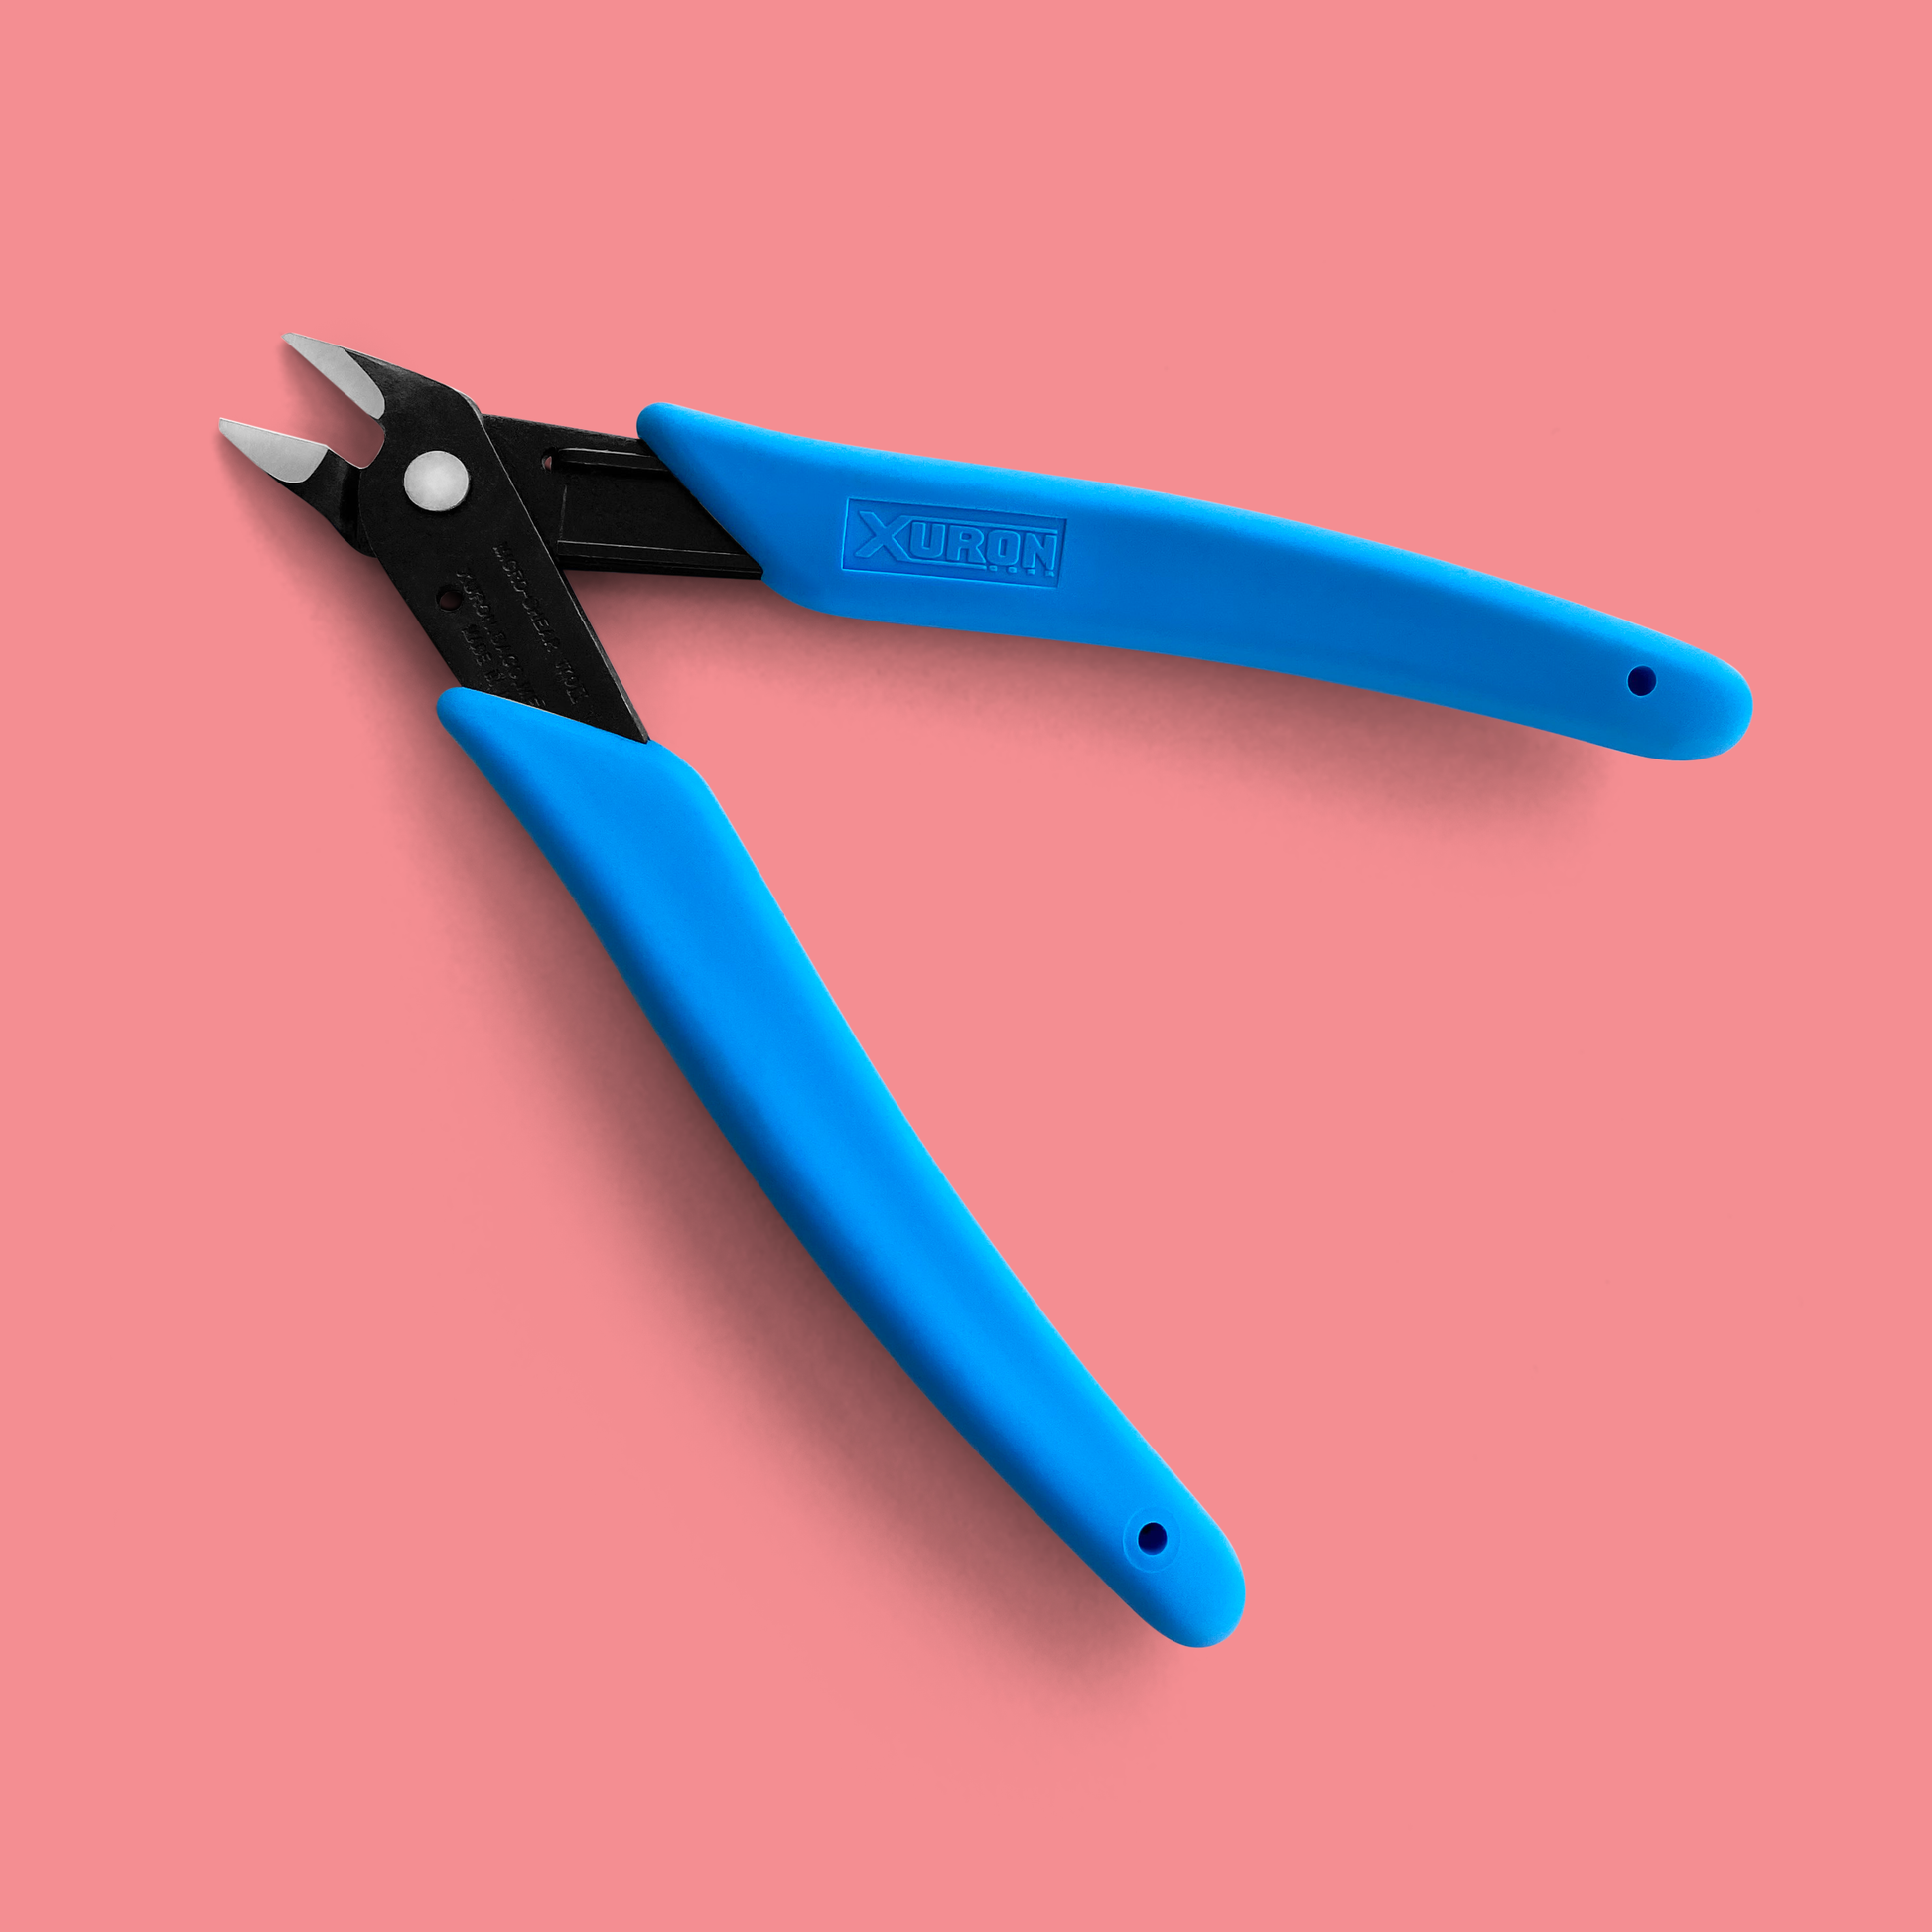 Precious Plastic toolbox: Sprue Snips for finishing recycled plastic products